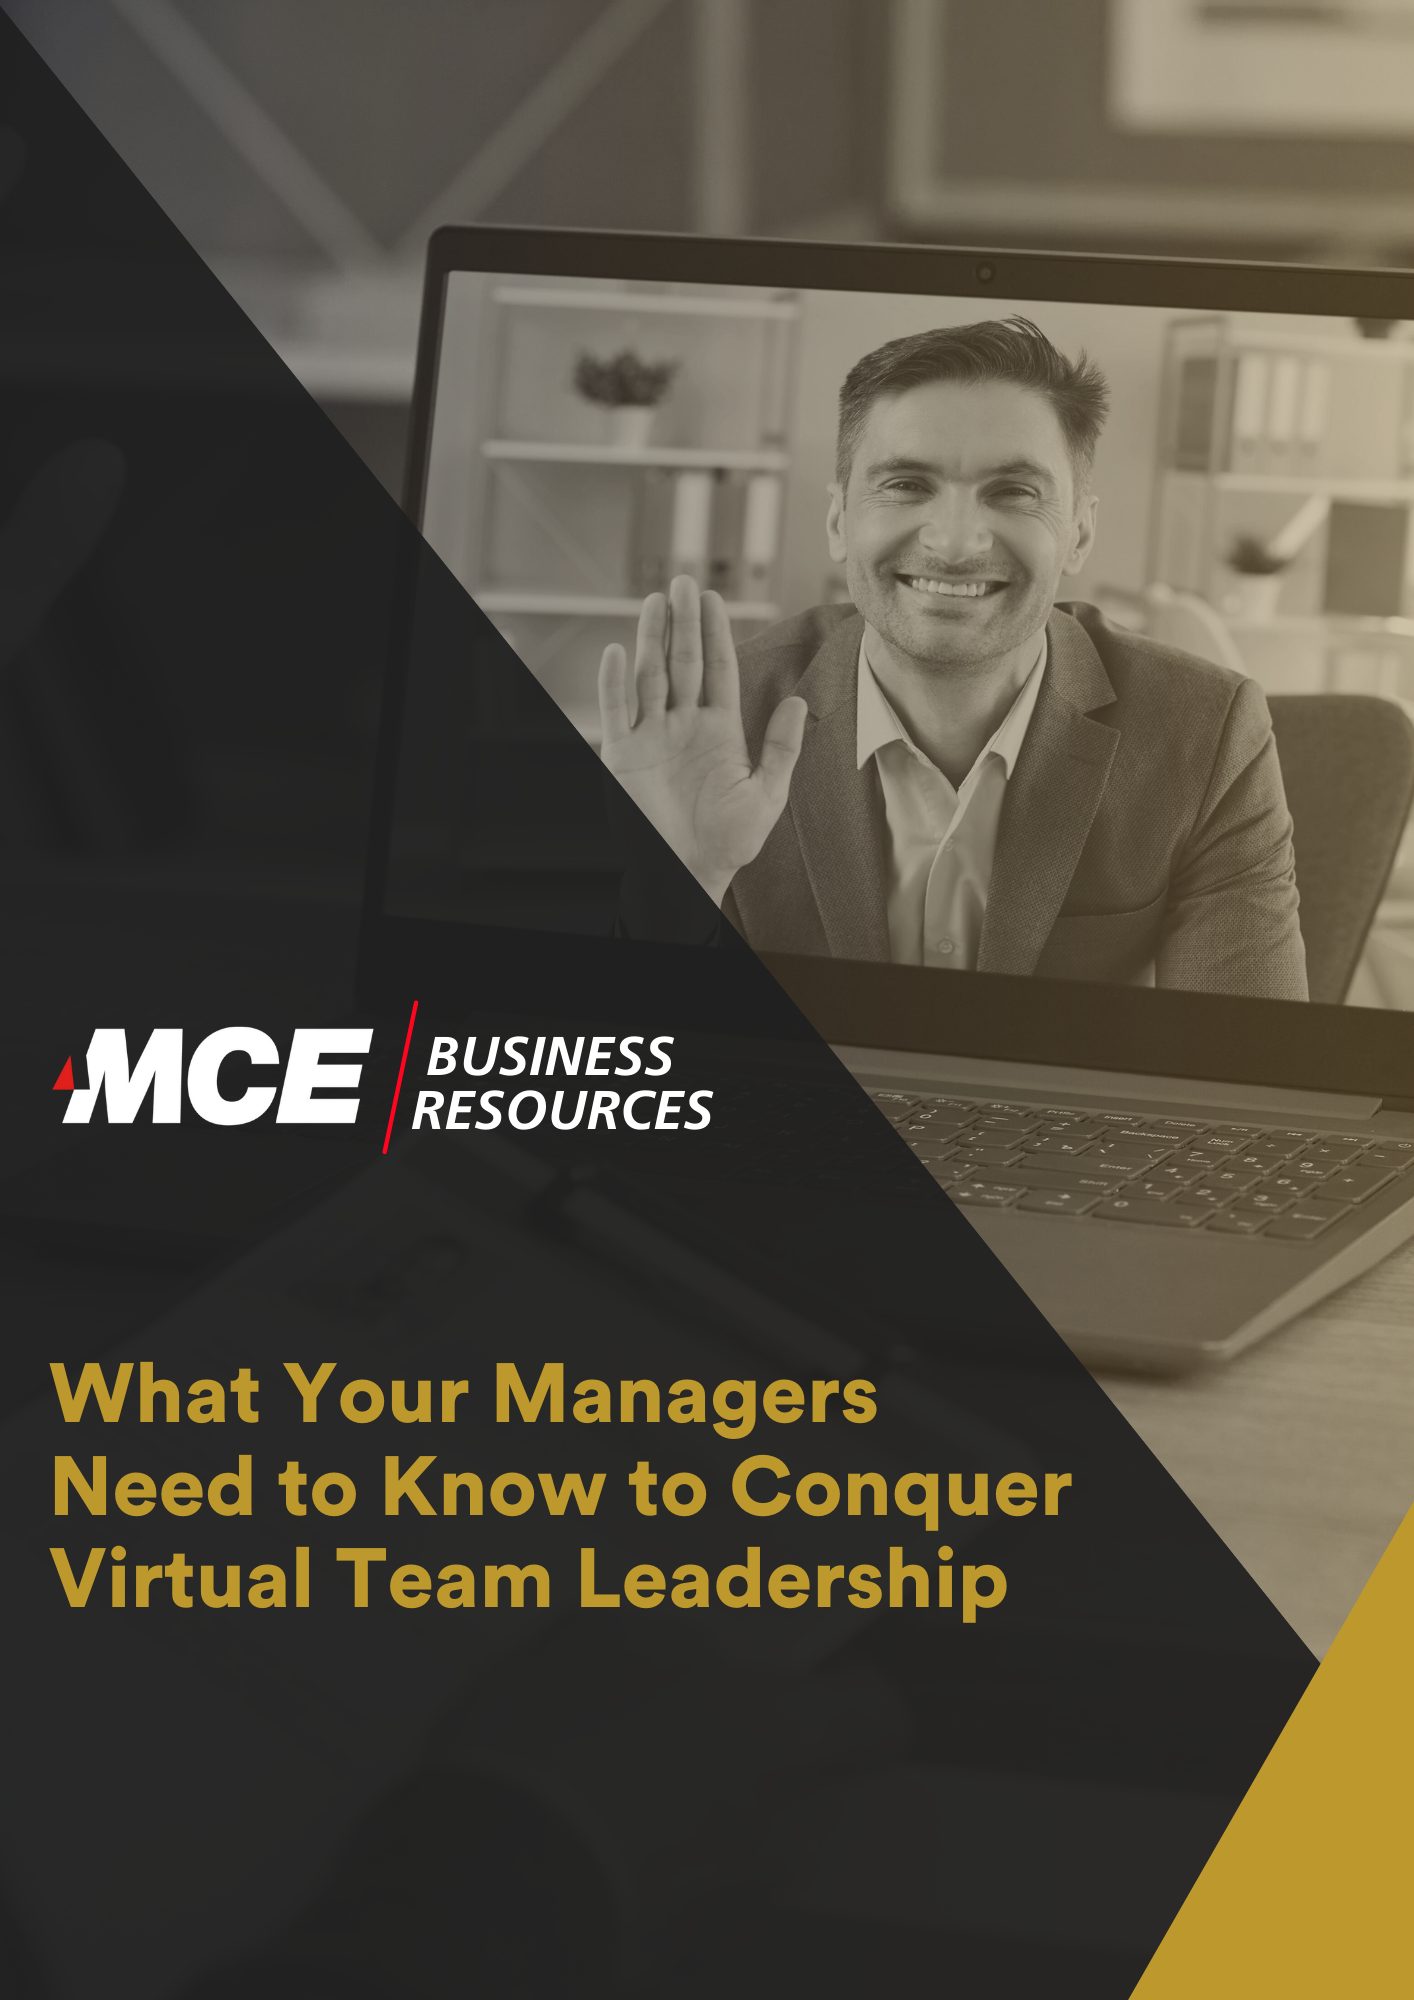 What Your Managers Need to Know to Conquer Virtual Team Leadership